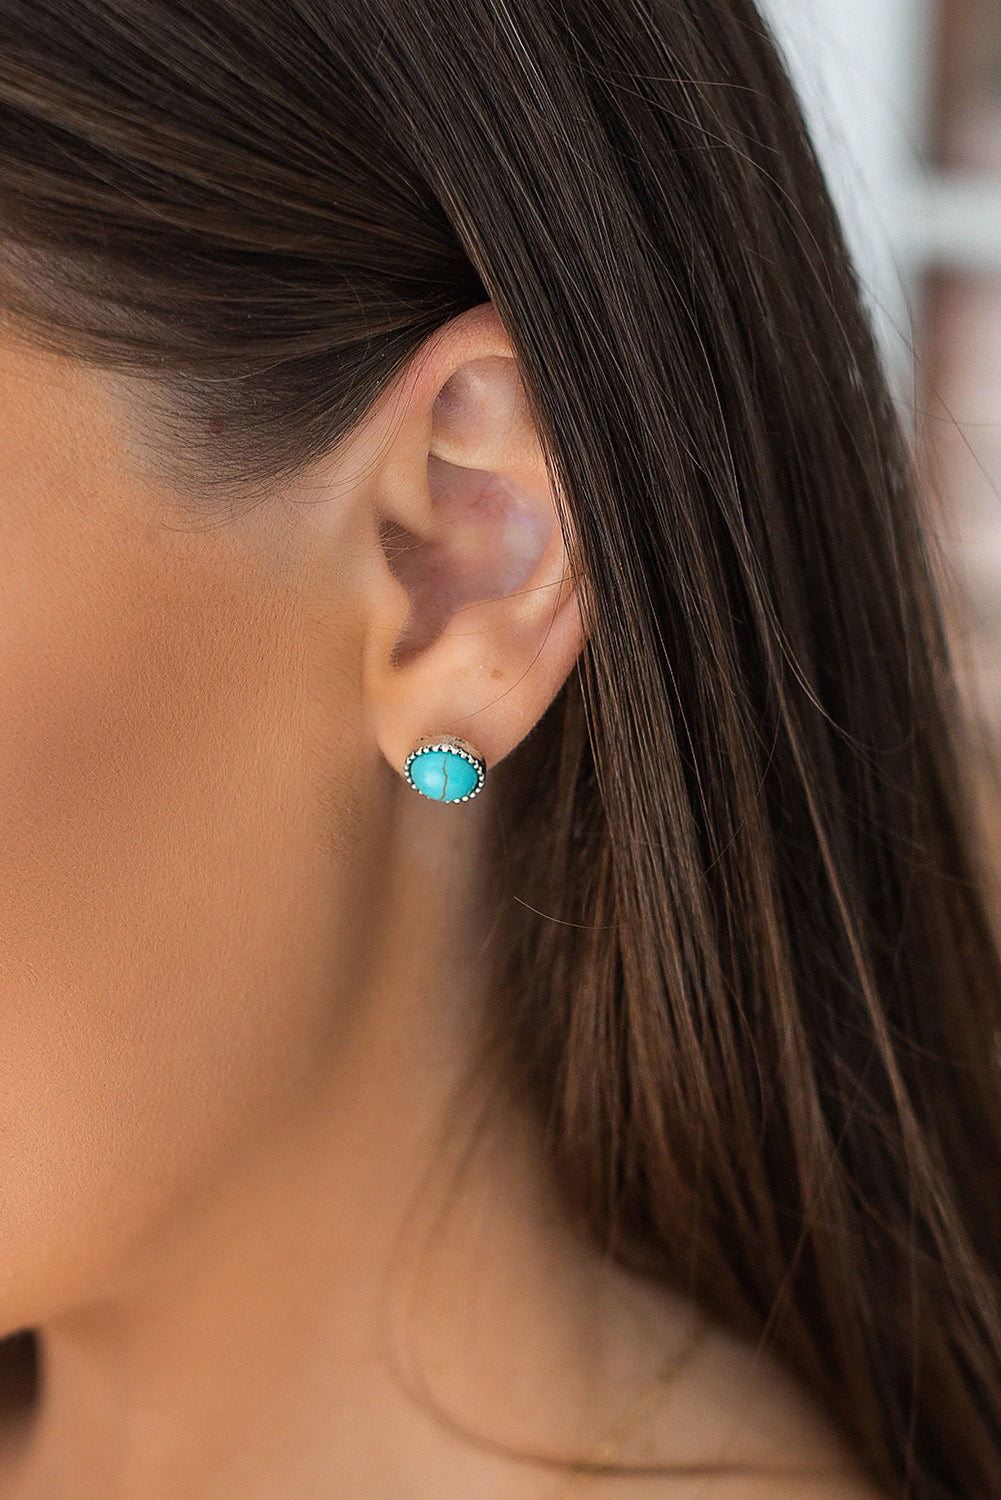 Green Three-piece Turquoise Stud Earrings Set - Dixie Hike & Style